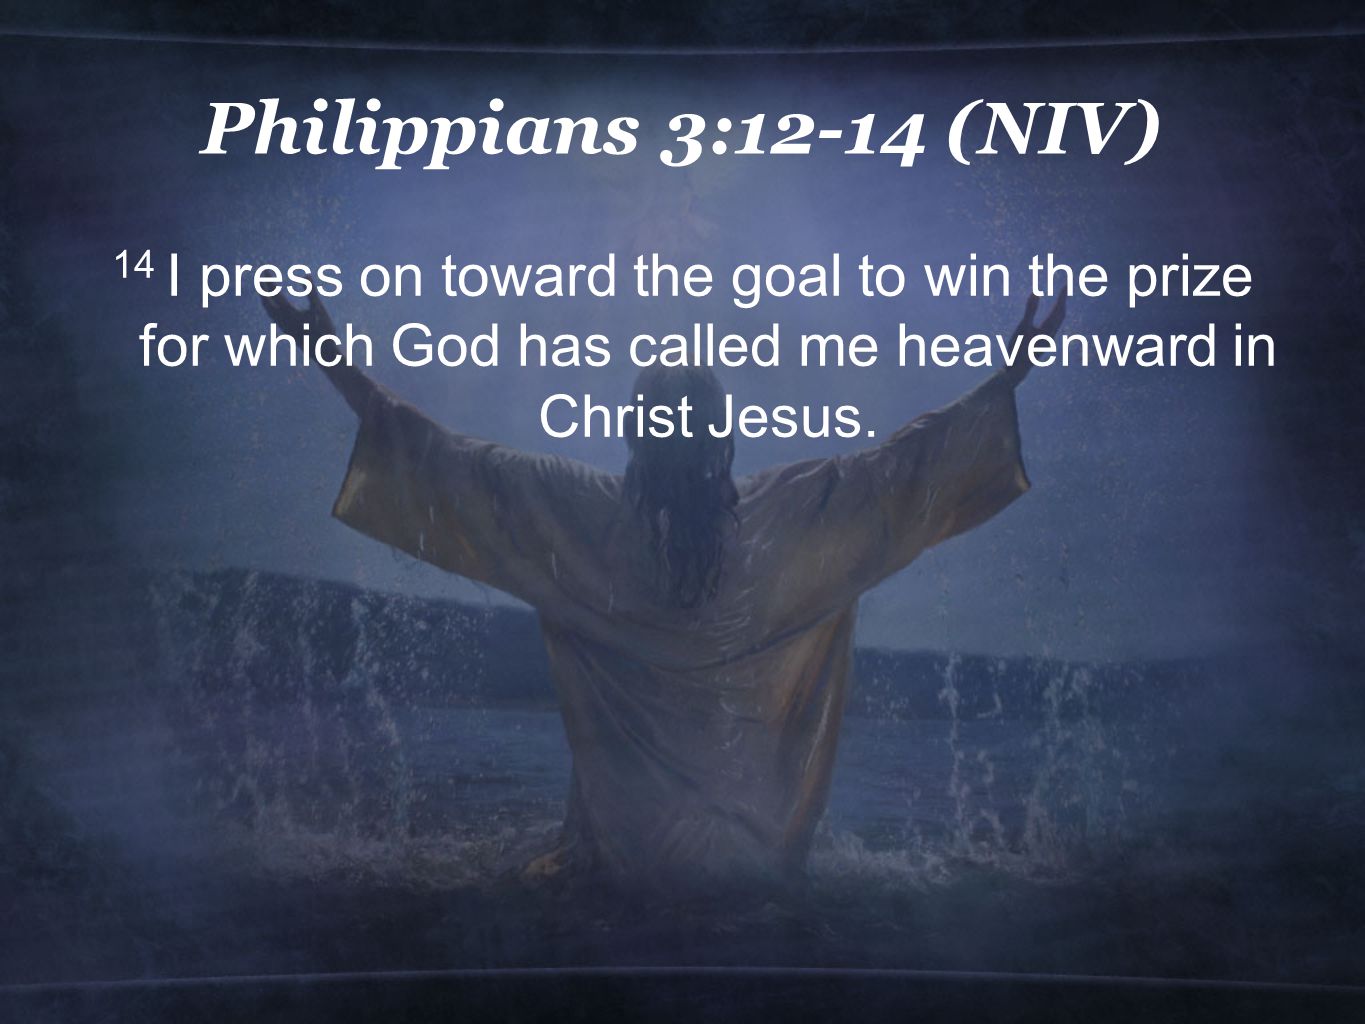 Philippians 3:12-14 (NIV) 14 I press on toward the goal to win the prize for which God has called me heavenward in Christ Jesus.